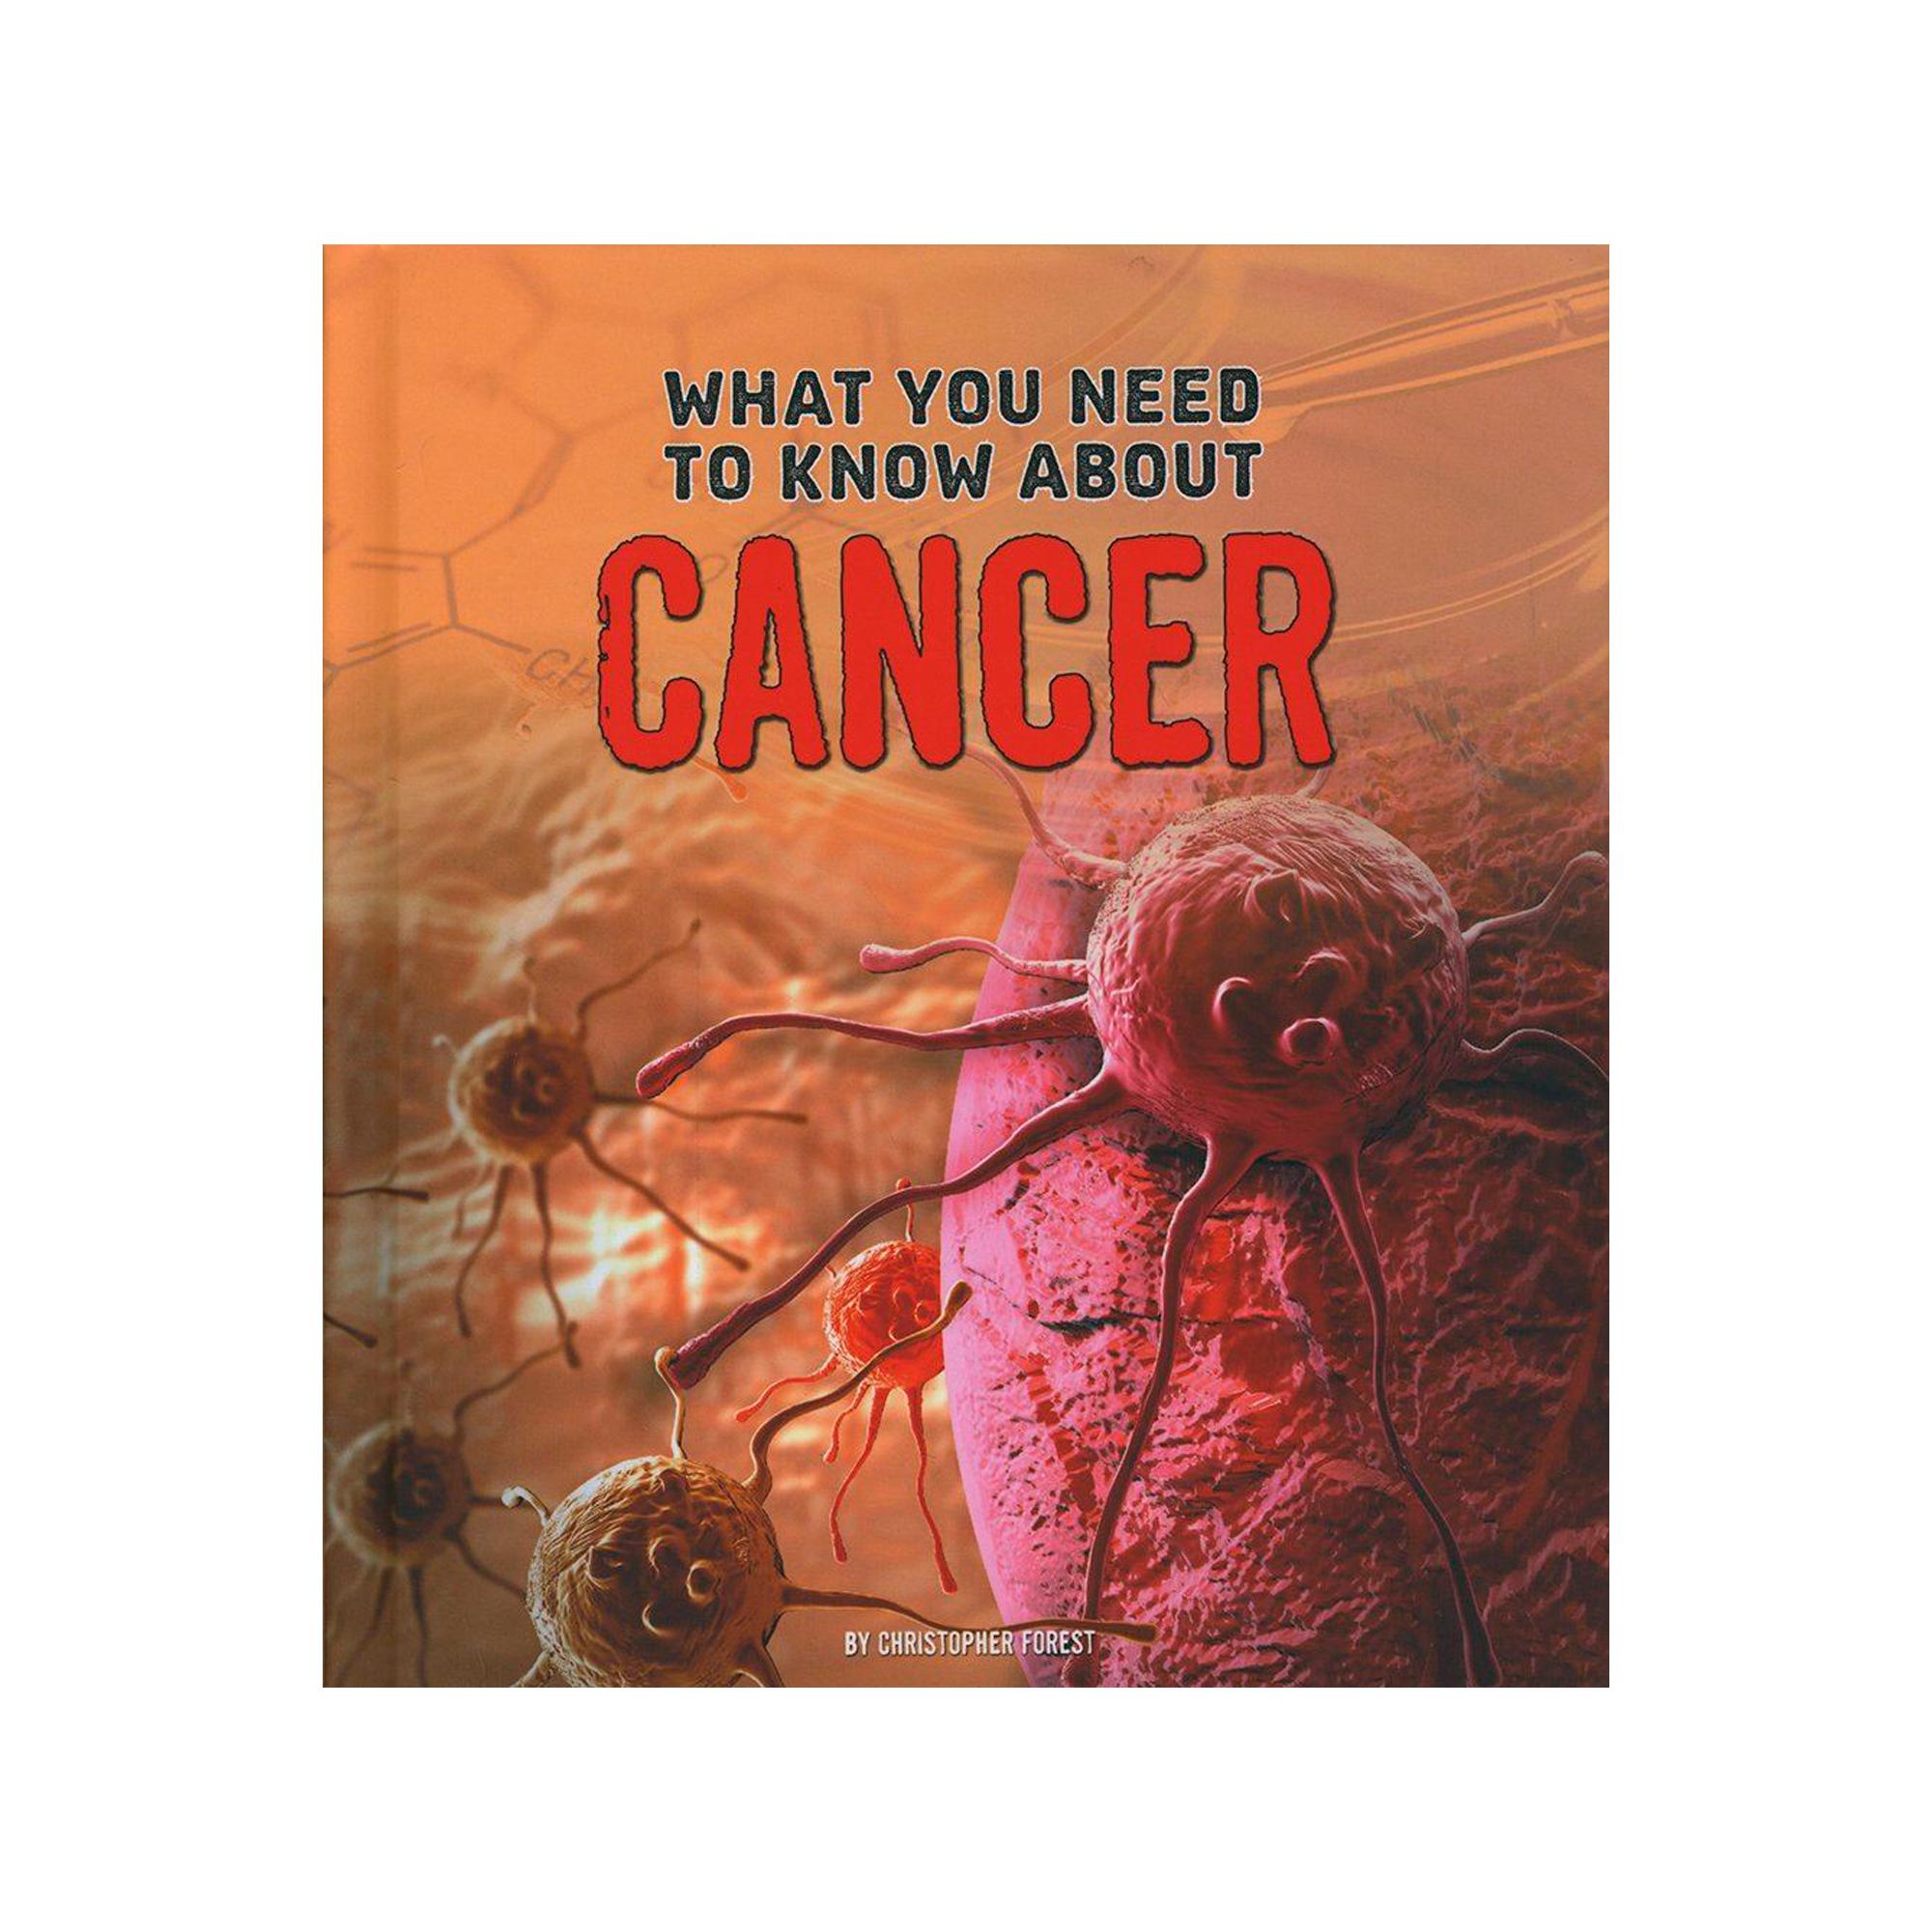 biography of cancer book